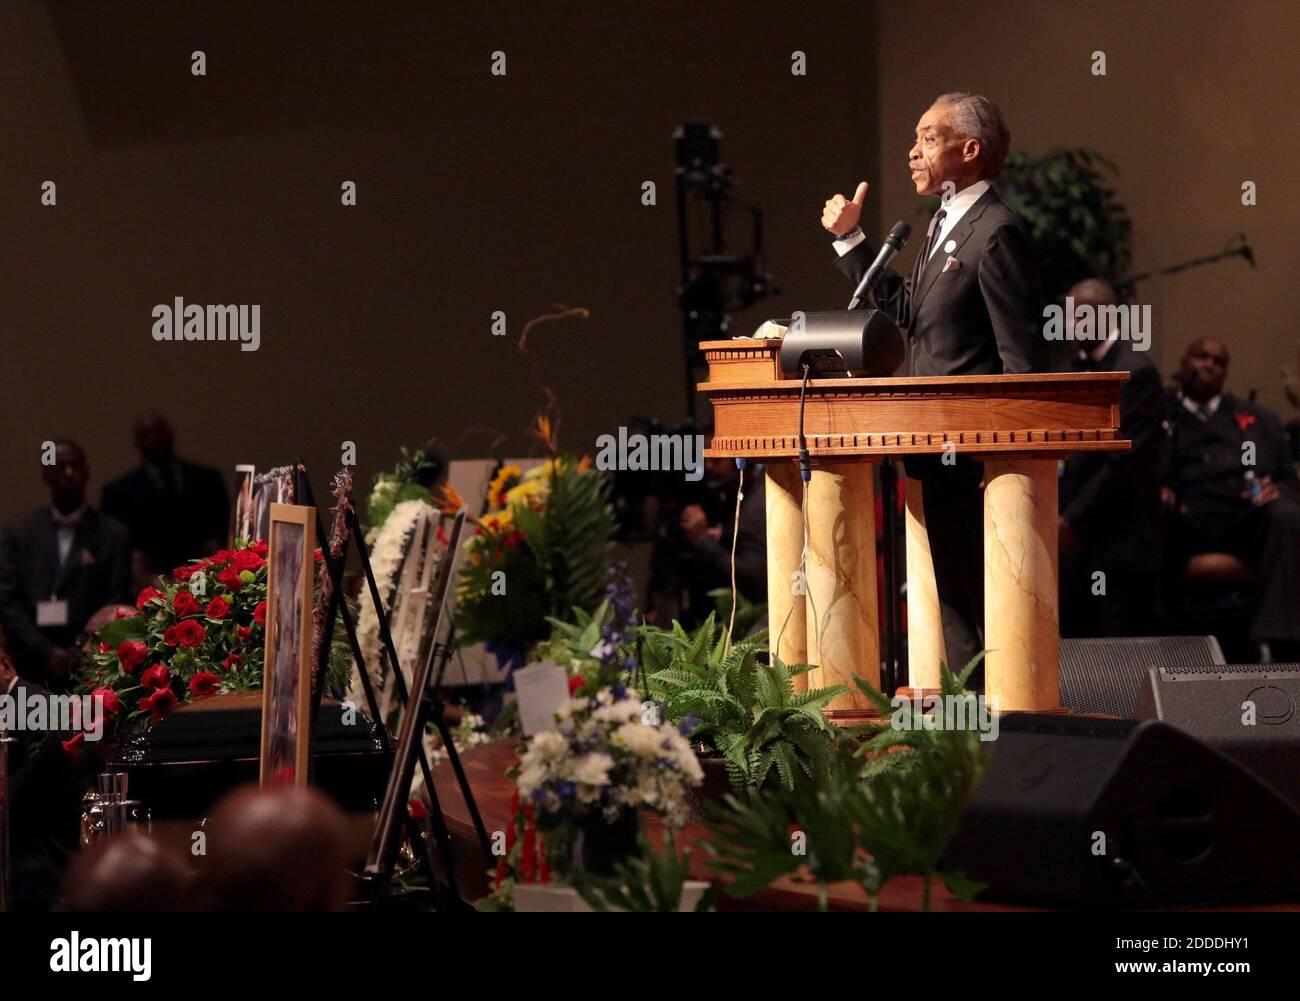 NO FILM, NO VIDEO, NO TV, NO DOCUMENTARY - The Rev. Al Sharpton speaks on Monday, August 25, 2014, at the funeral for Michael Brown at Friendly Temple Missionary Baptist Church in St. Louis, MO, USA. Michael Brown, 18, was shot and killed by a Ferguson police officer on August 9, 2014. Photo by Robert Cohen/St. Louis Post-Dispatch/MCT/ABACAPRESS.COM Stock Photo